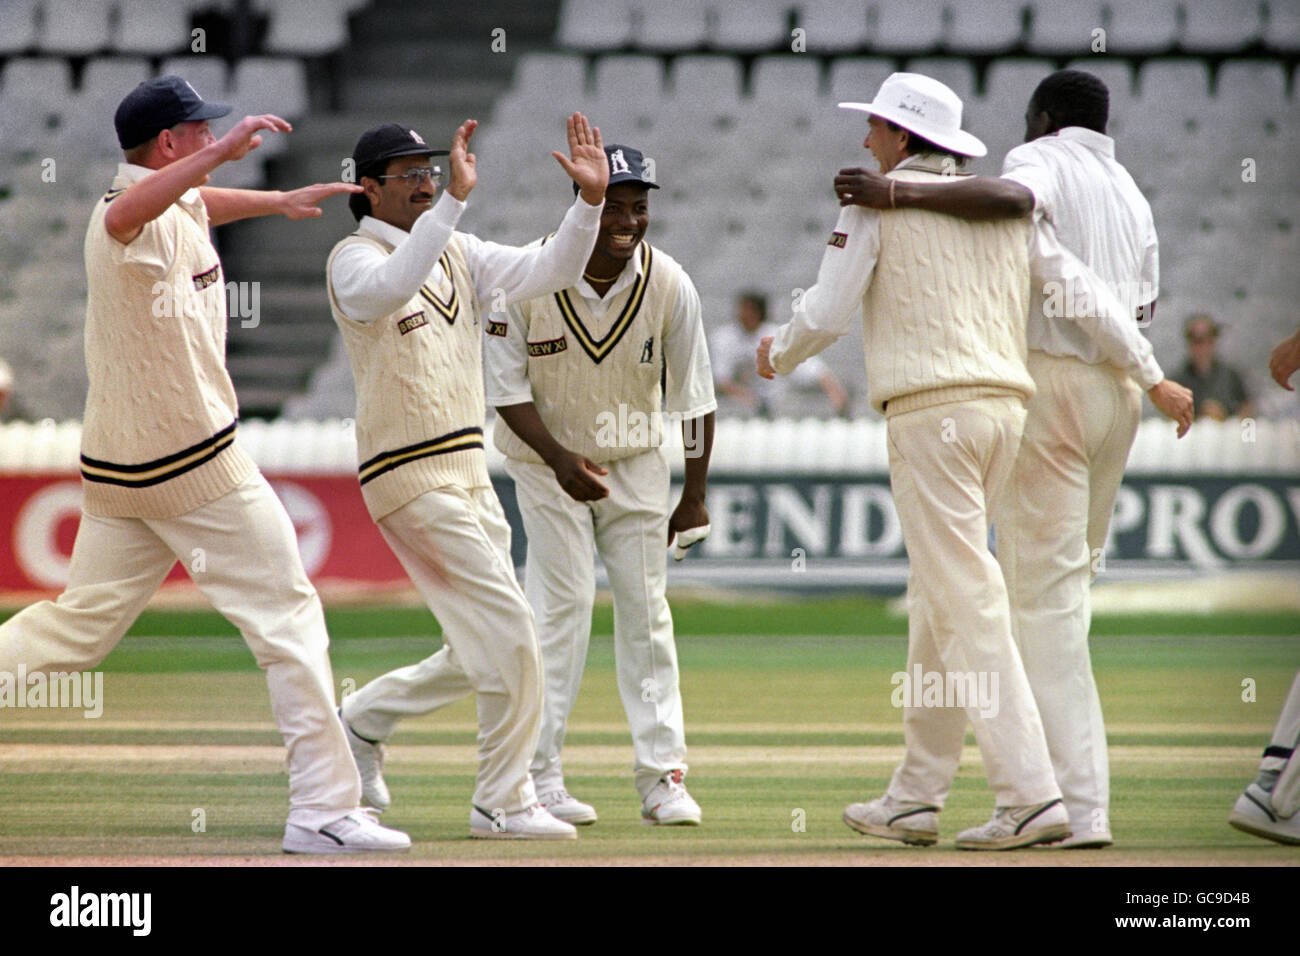 BRIAN LARA [C] AND WARWICKSHIRE COLLEAGUES CLOSE IN TO CONGRATULATE GLADSTONE SMALL [R] ON GAINING FIVE WICKETS IN A SINGLE INNINGS. WARWICKSHIRE BEAT GLAMORGAN IN THE FOUR DAY MATCH WITH INNINGS TO SPARE. Stock Photo